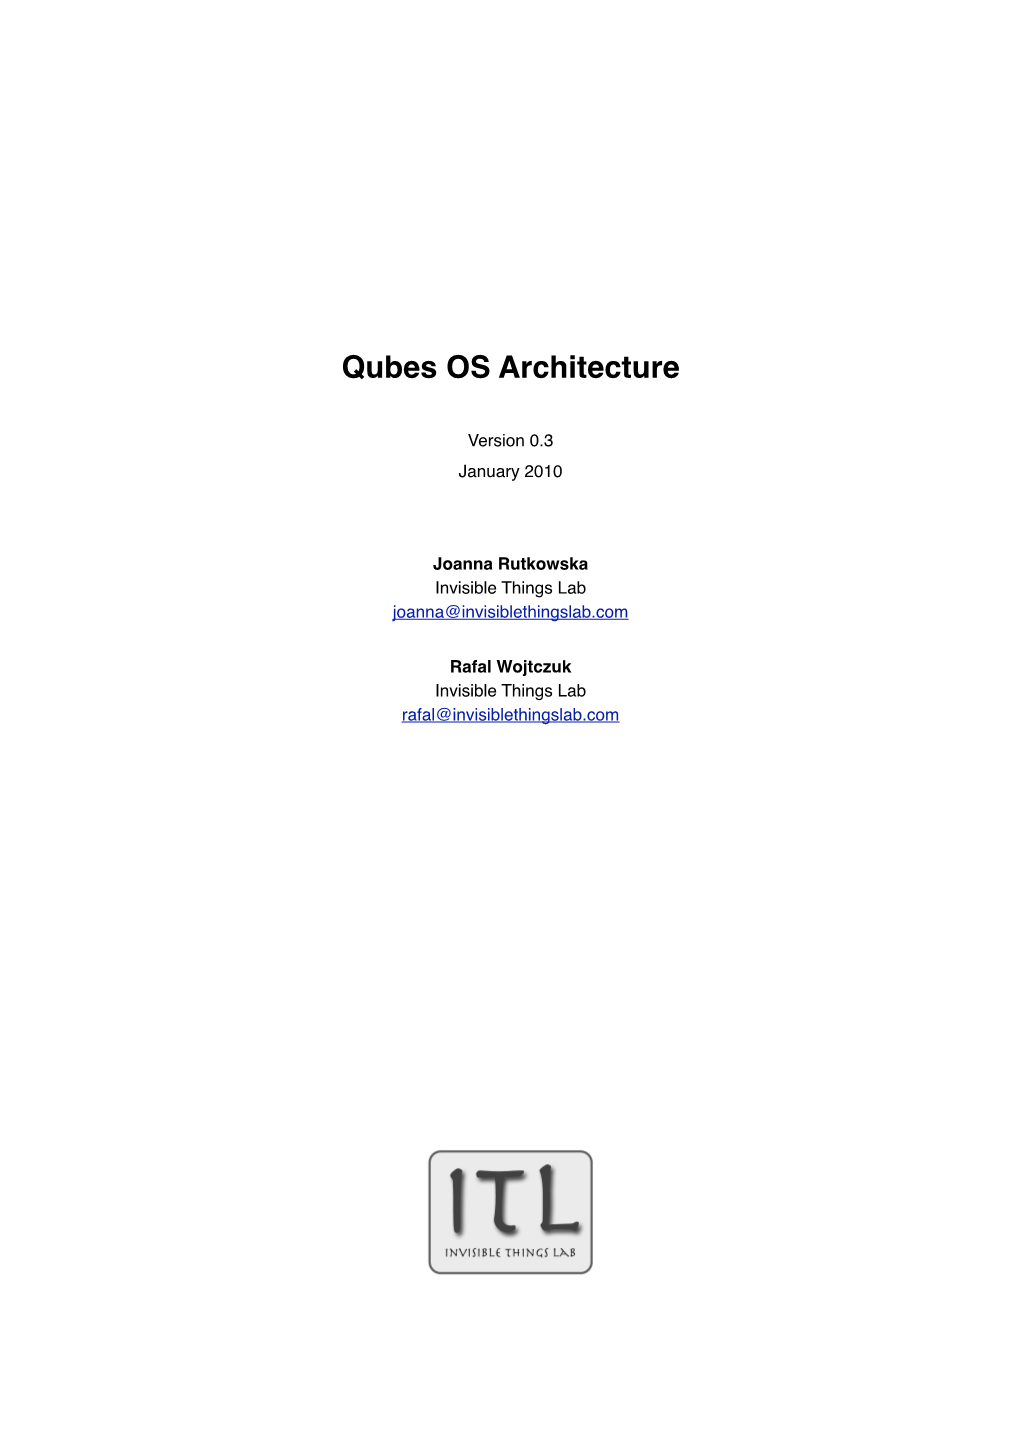 Qubes Architecture Is Presented in the Next Chapter